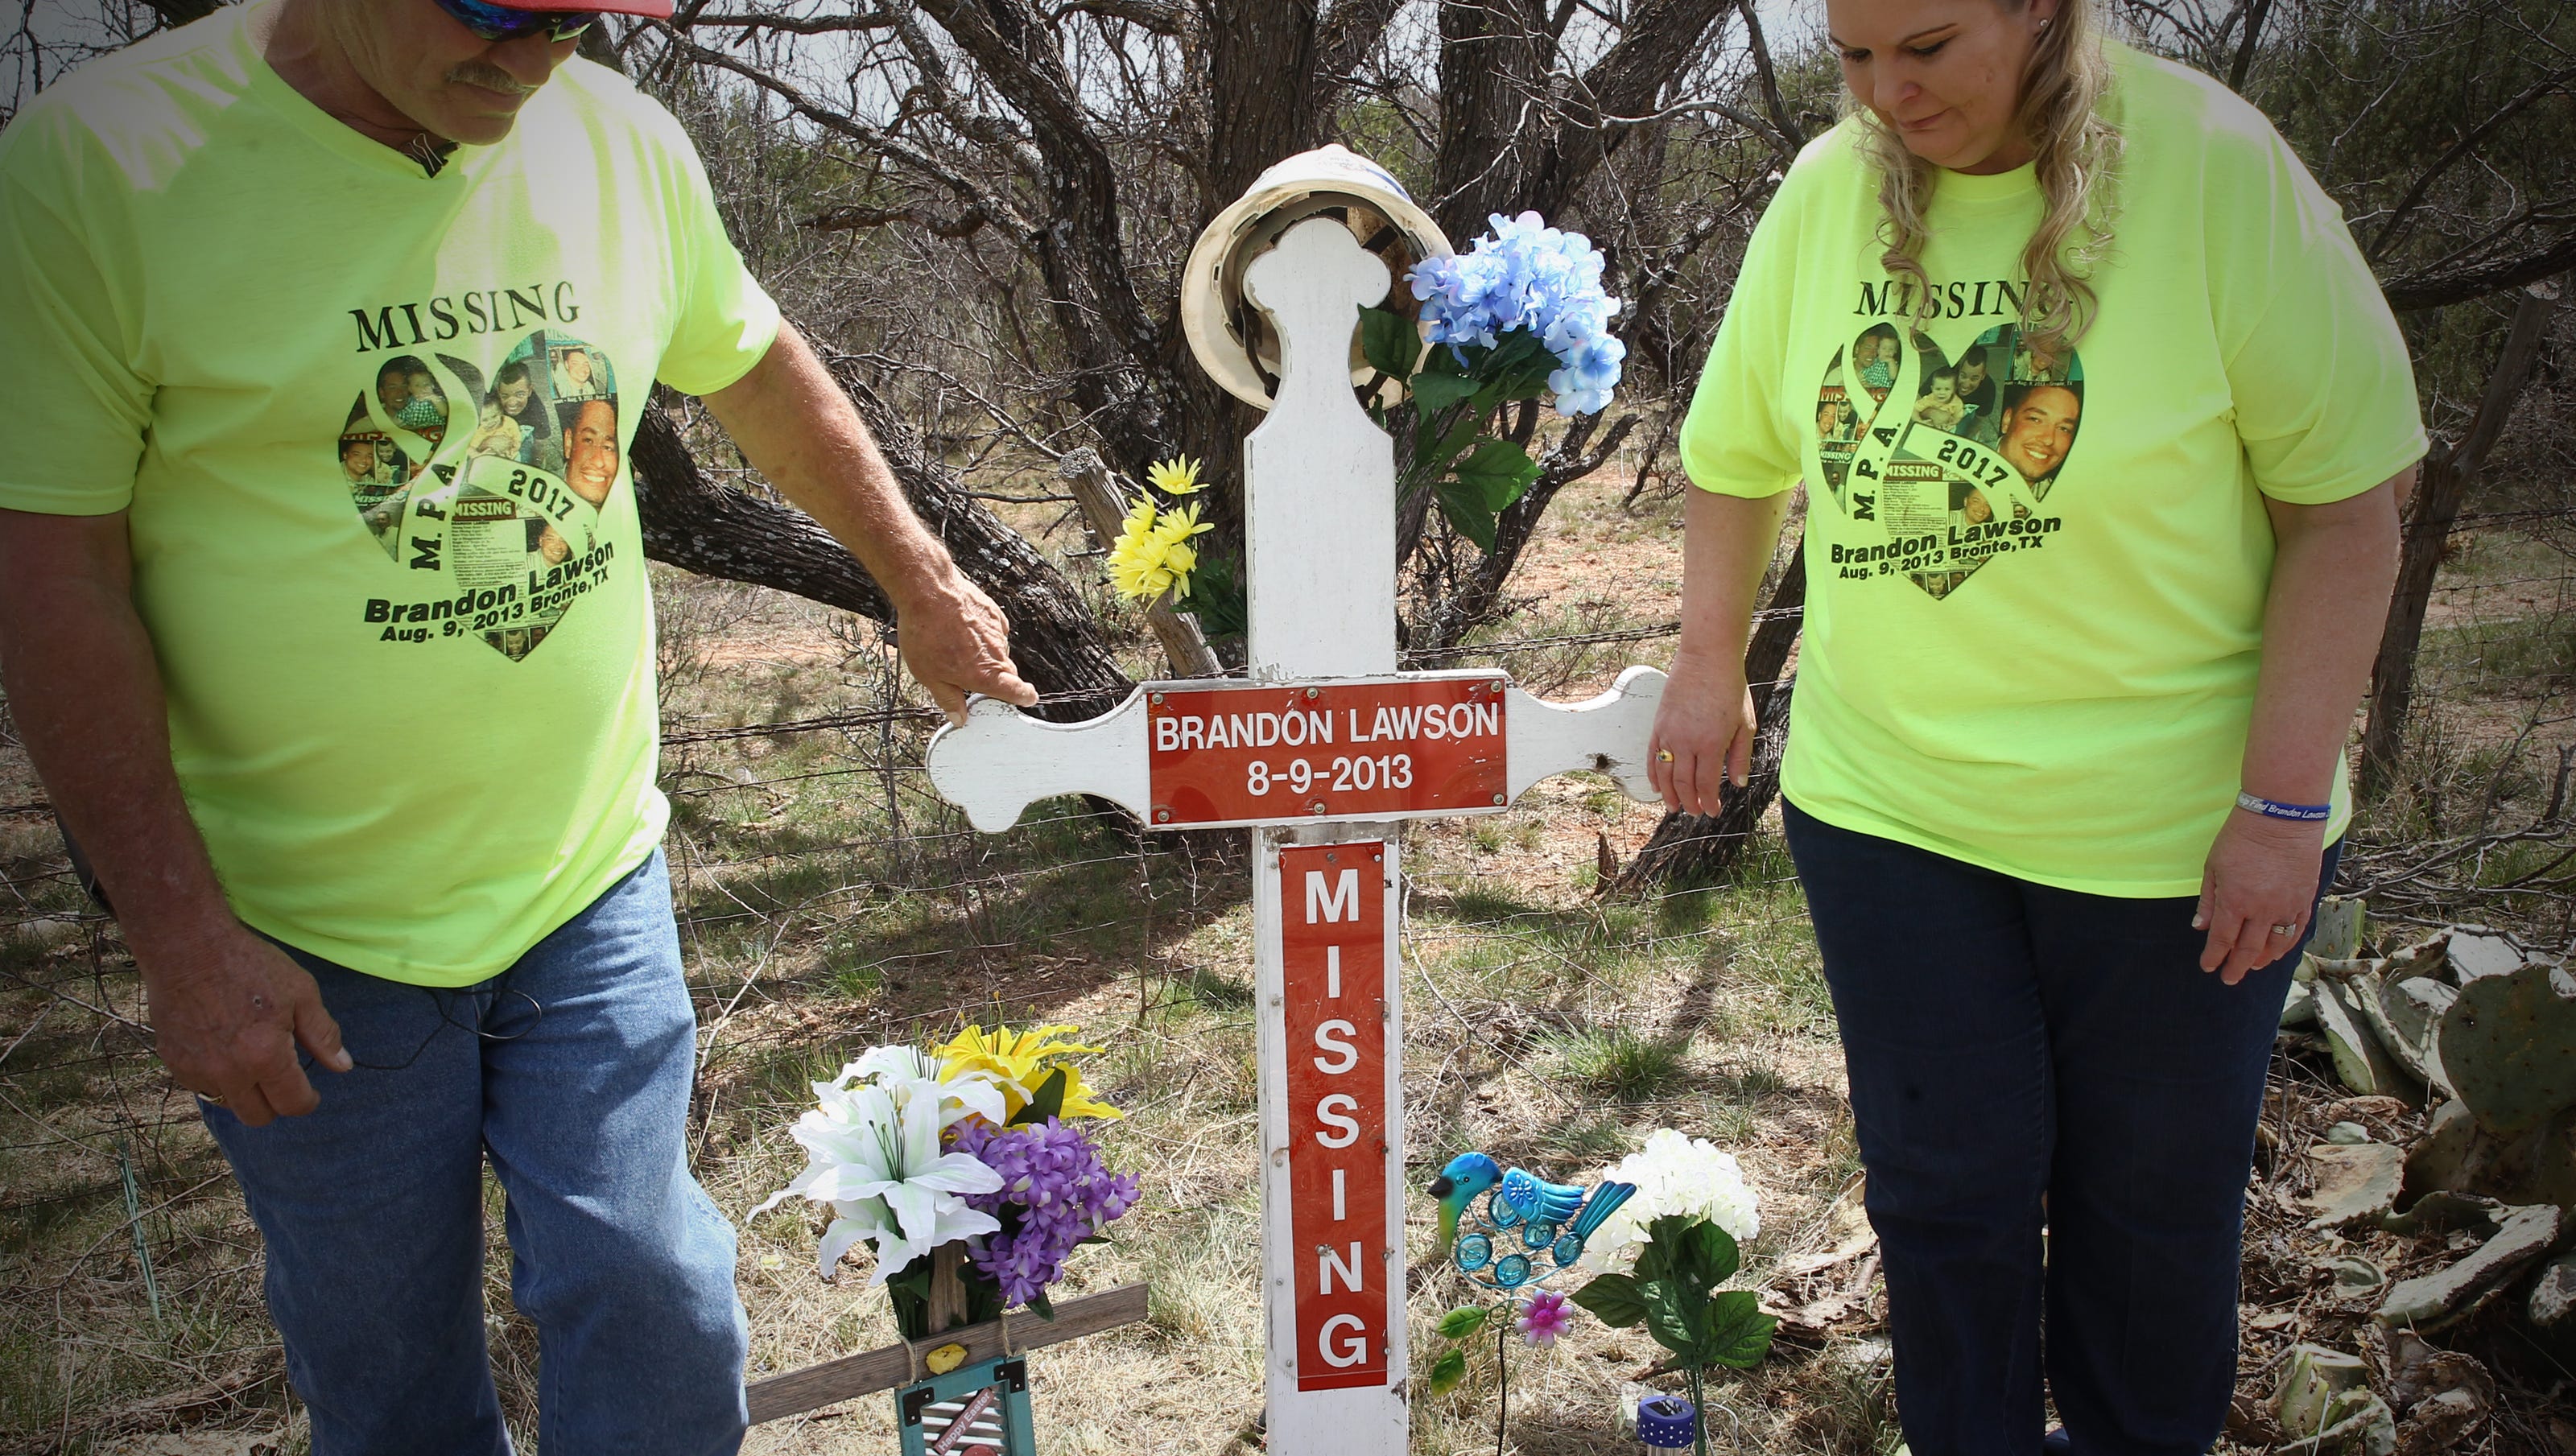 The mystery around the disappearance of Brandon Lawson in West Texas